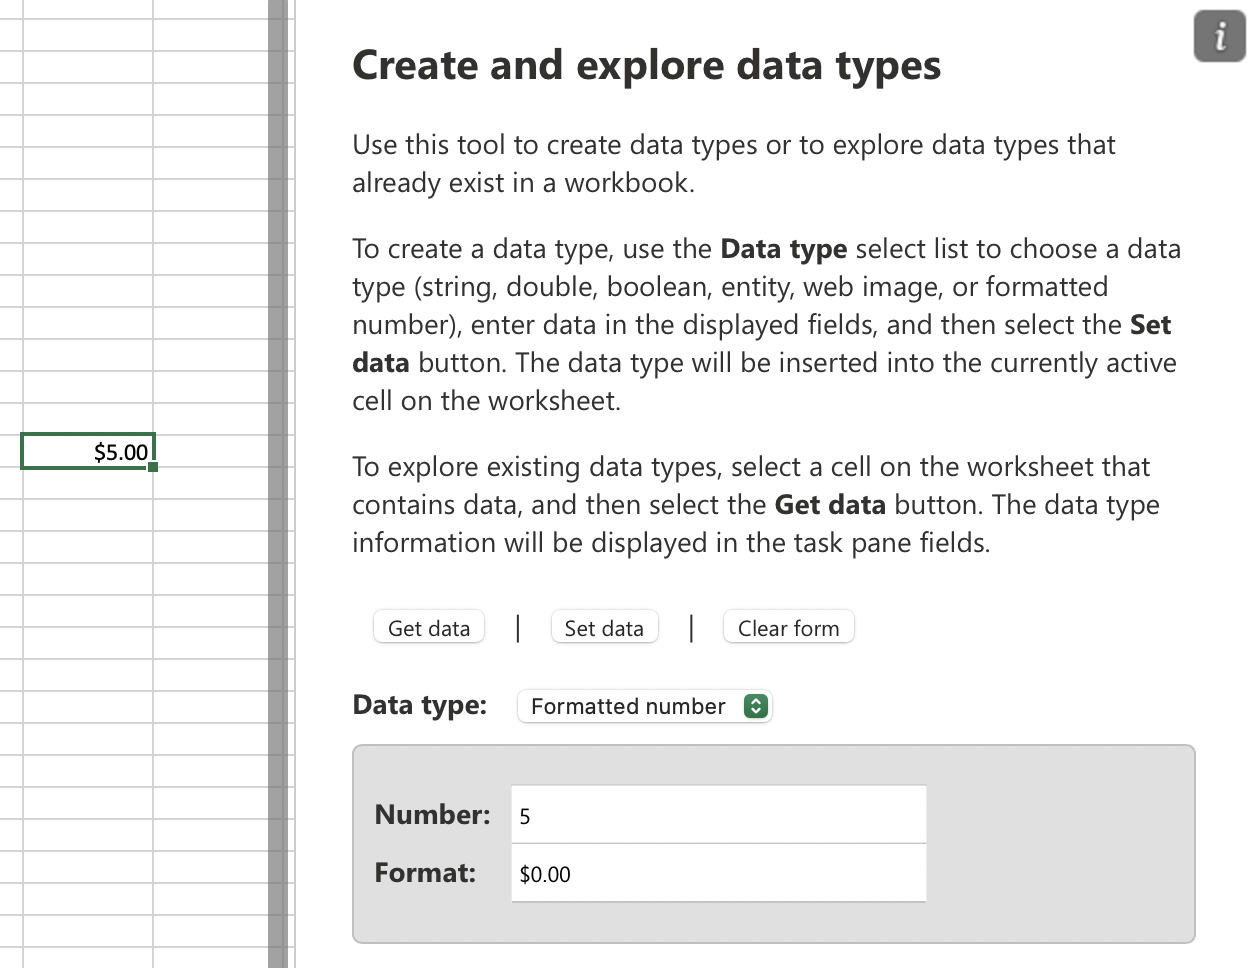 Create and explore data types in Excel - Code Samples | Microsoft Learn